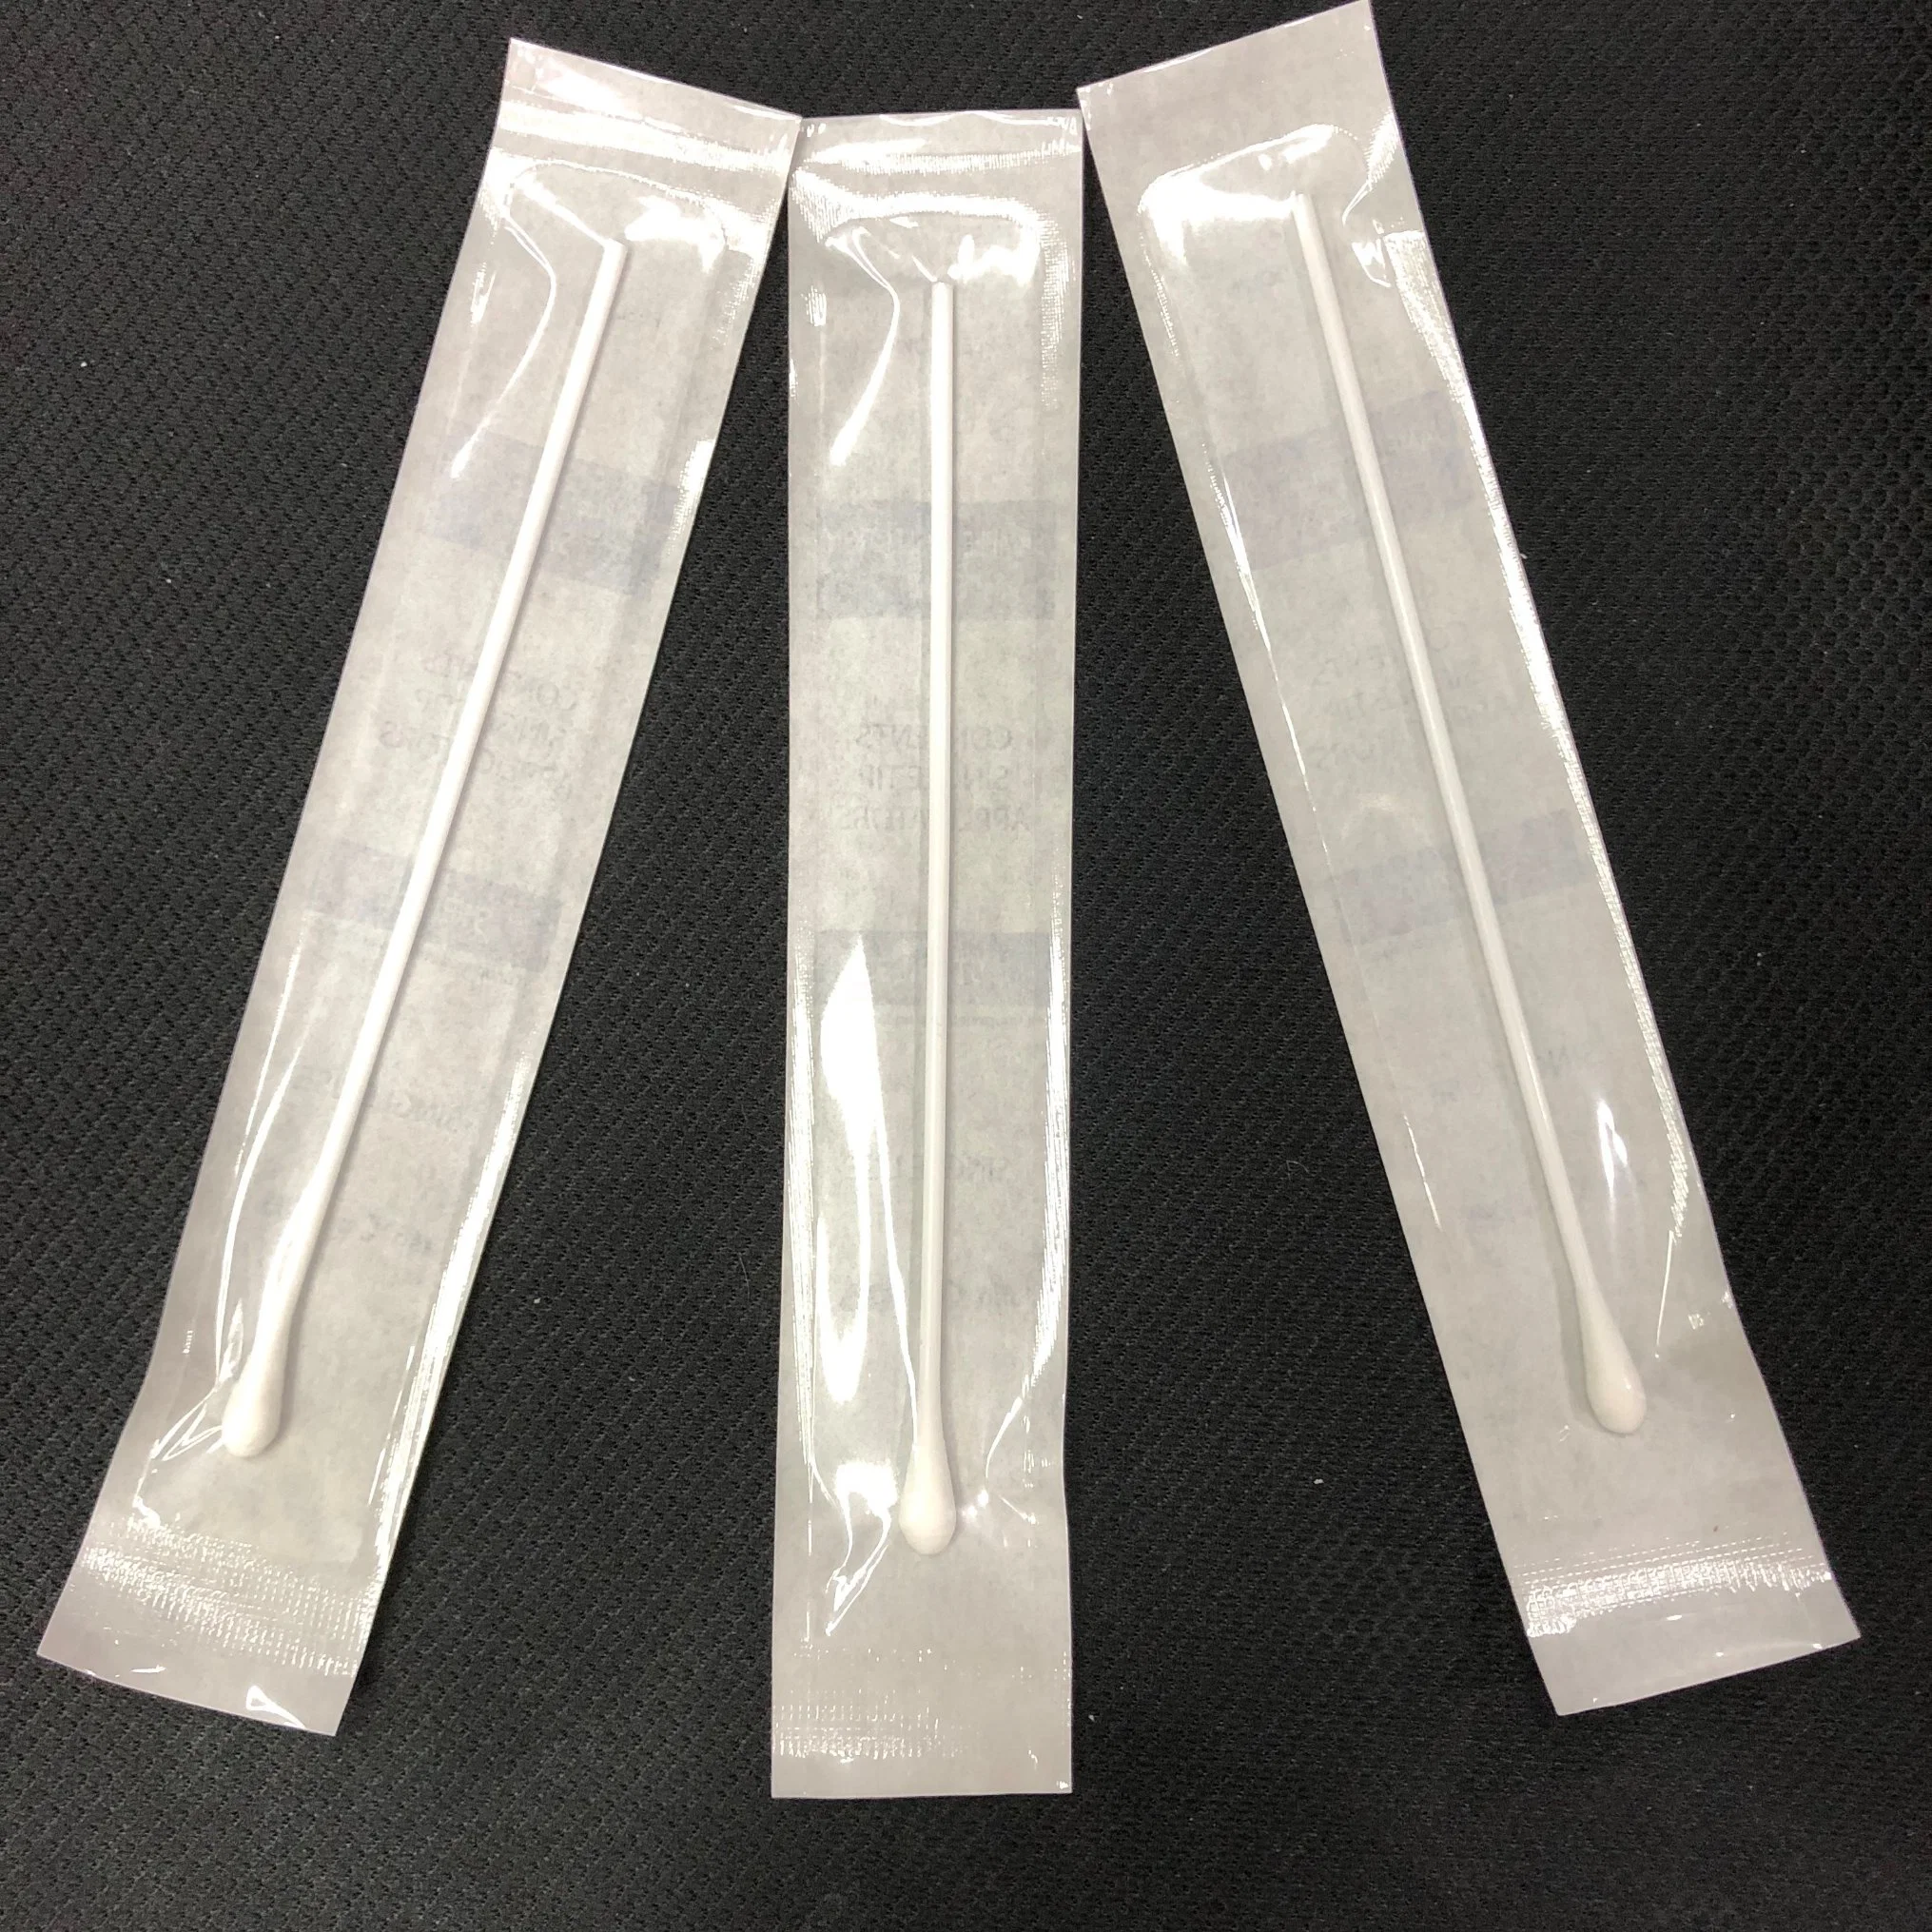 Disposable Plastic Stick Cotton Swab for Sampling-Large Quantity in Stock